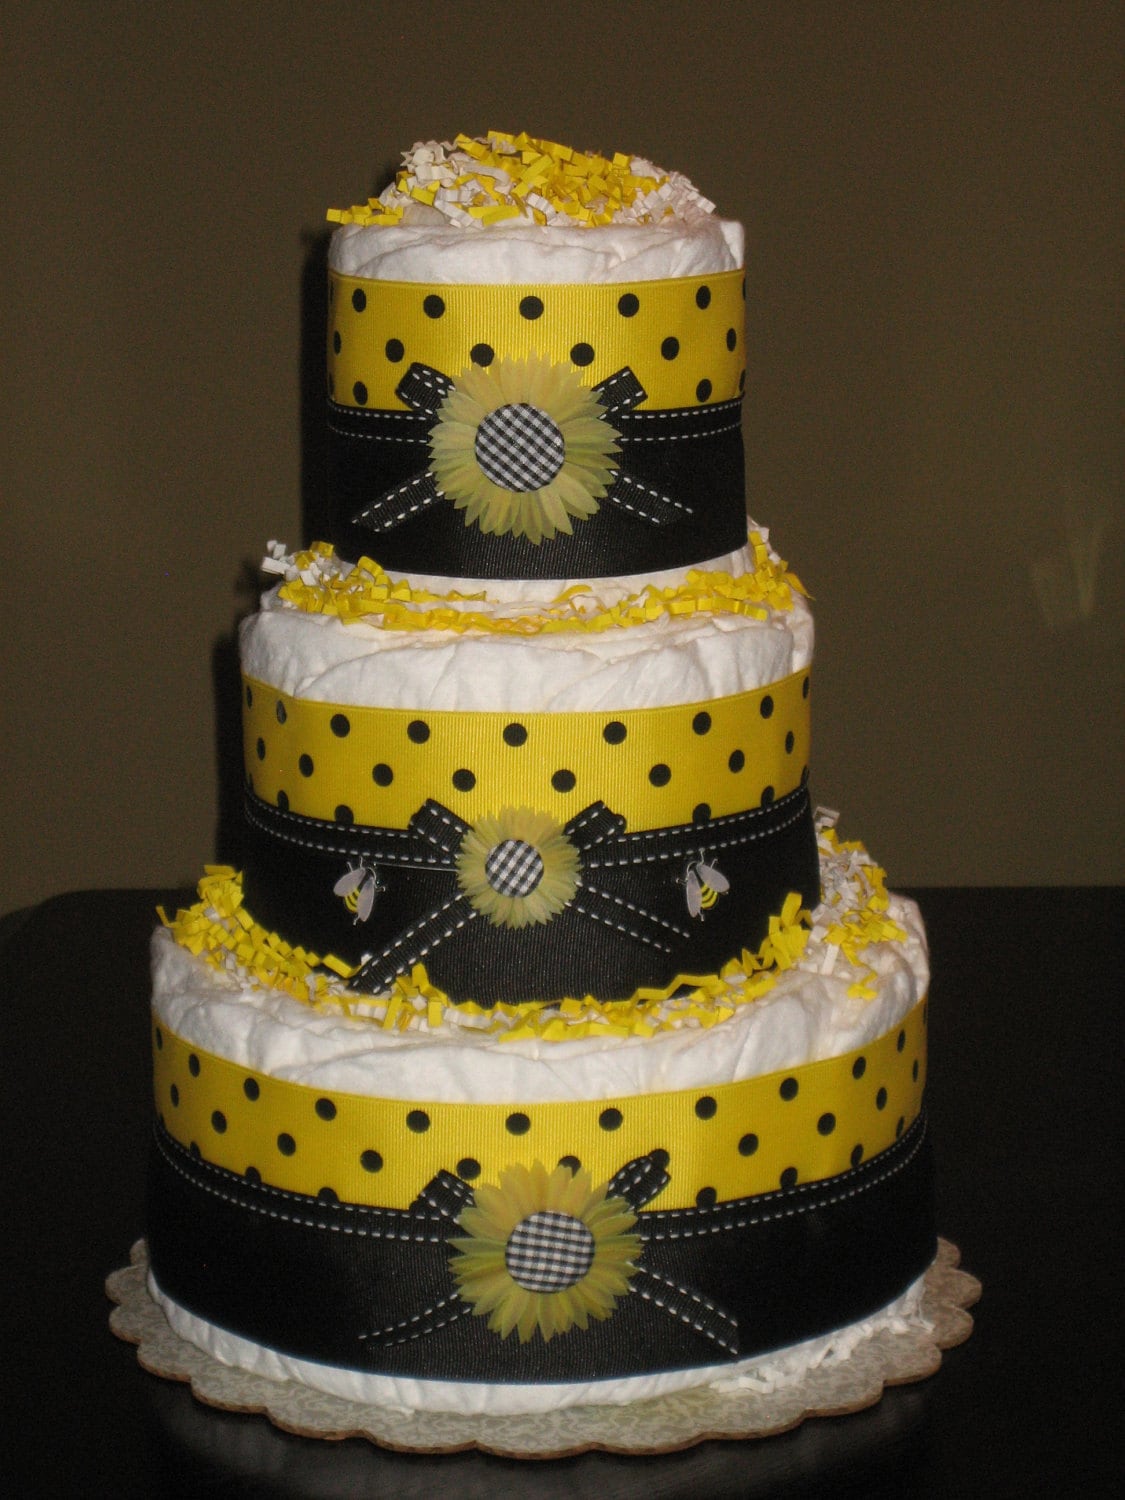 Bumble Bee Diaper Cake for Baby Shower Centerpiece New Baby